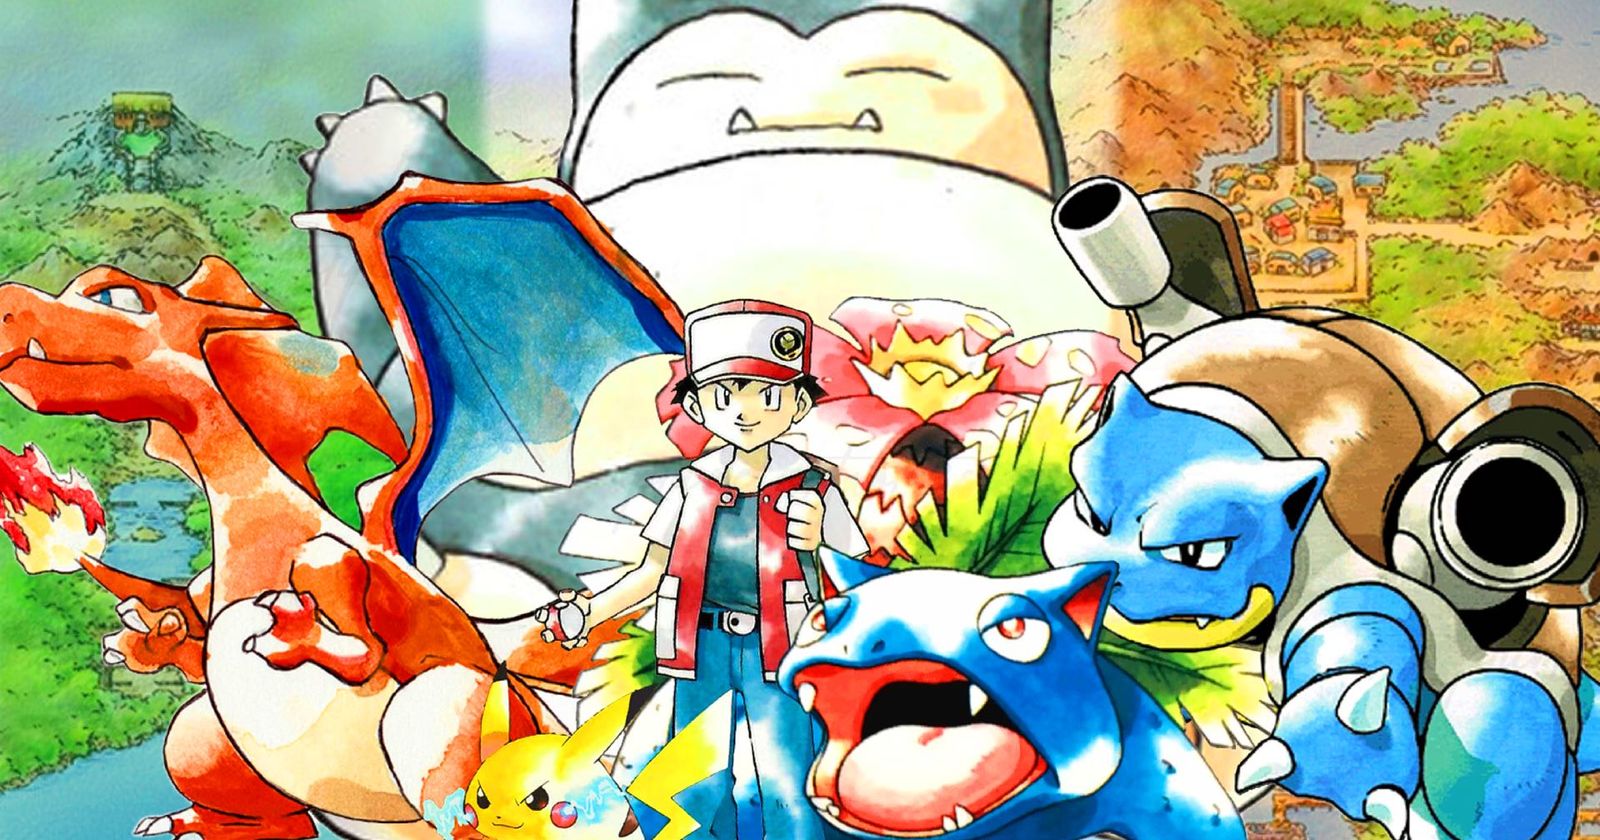 Pokémon Red & Blue portuguese ad : Free Download, Borrow, and